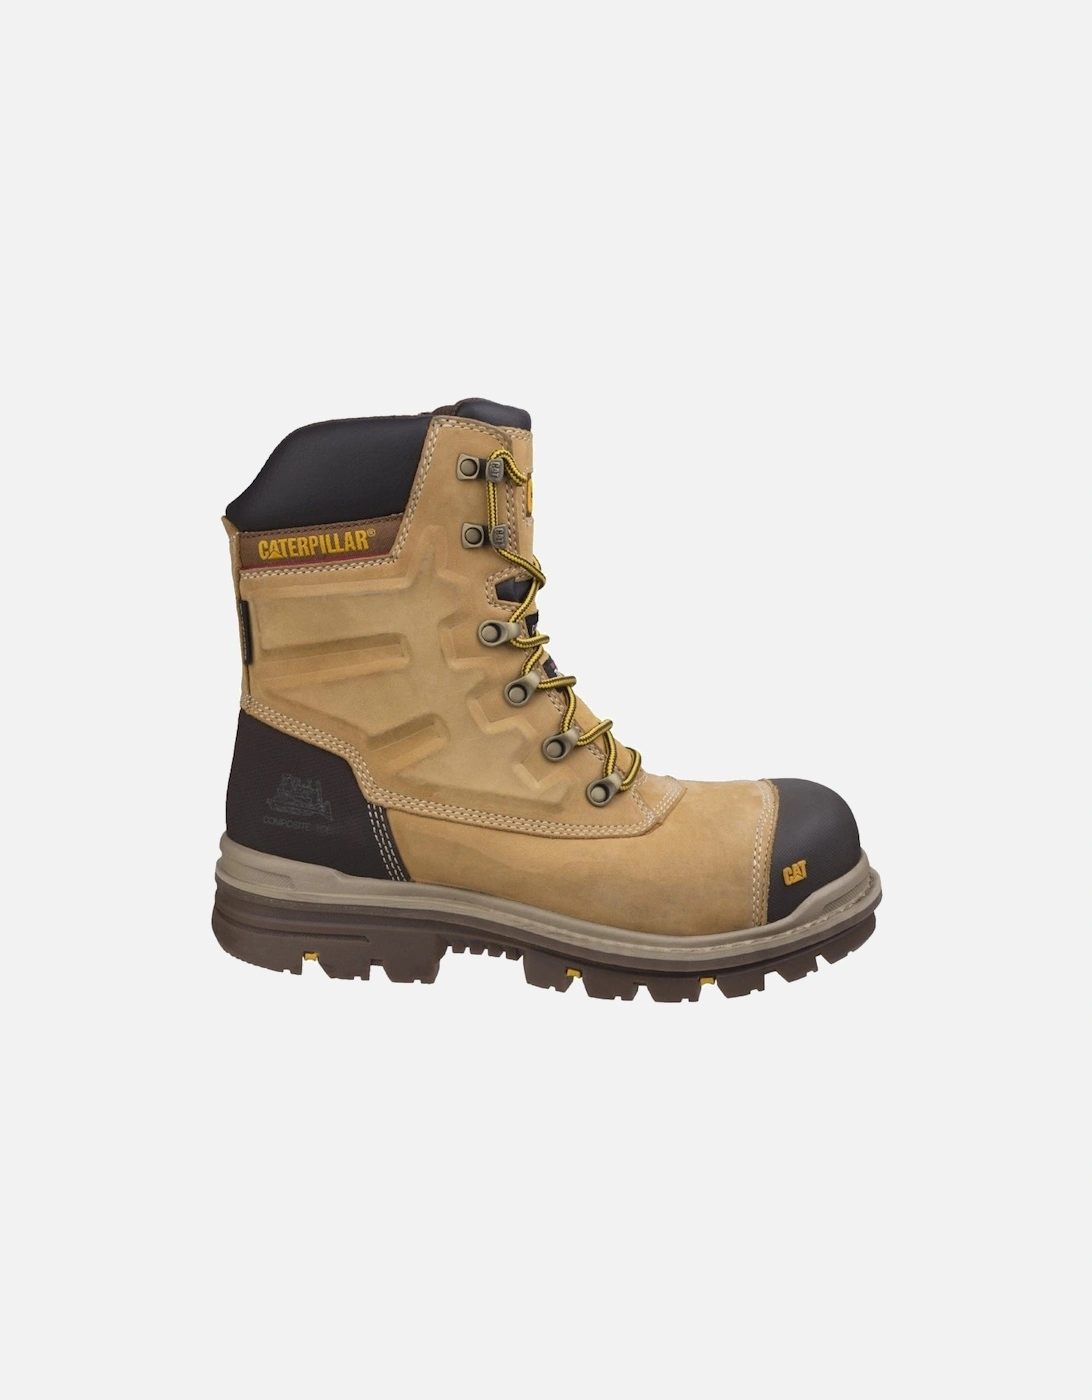 Premier Mens Safety Boots